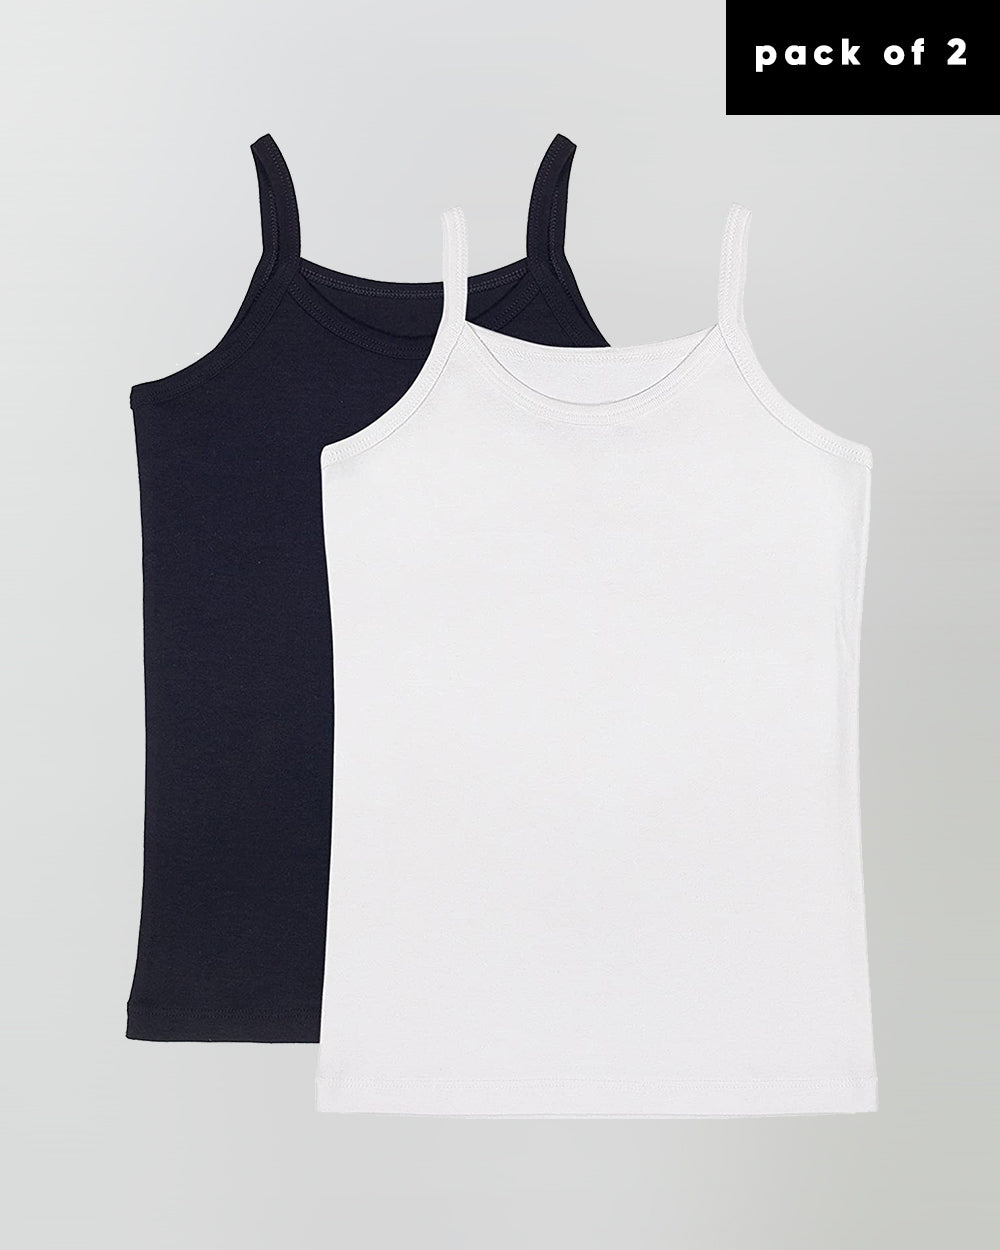 Girls Tank Top Cami Undershirts Cotton Camisoles 3 Pack